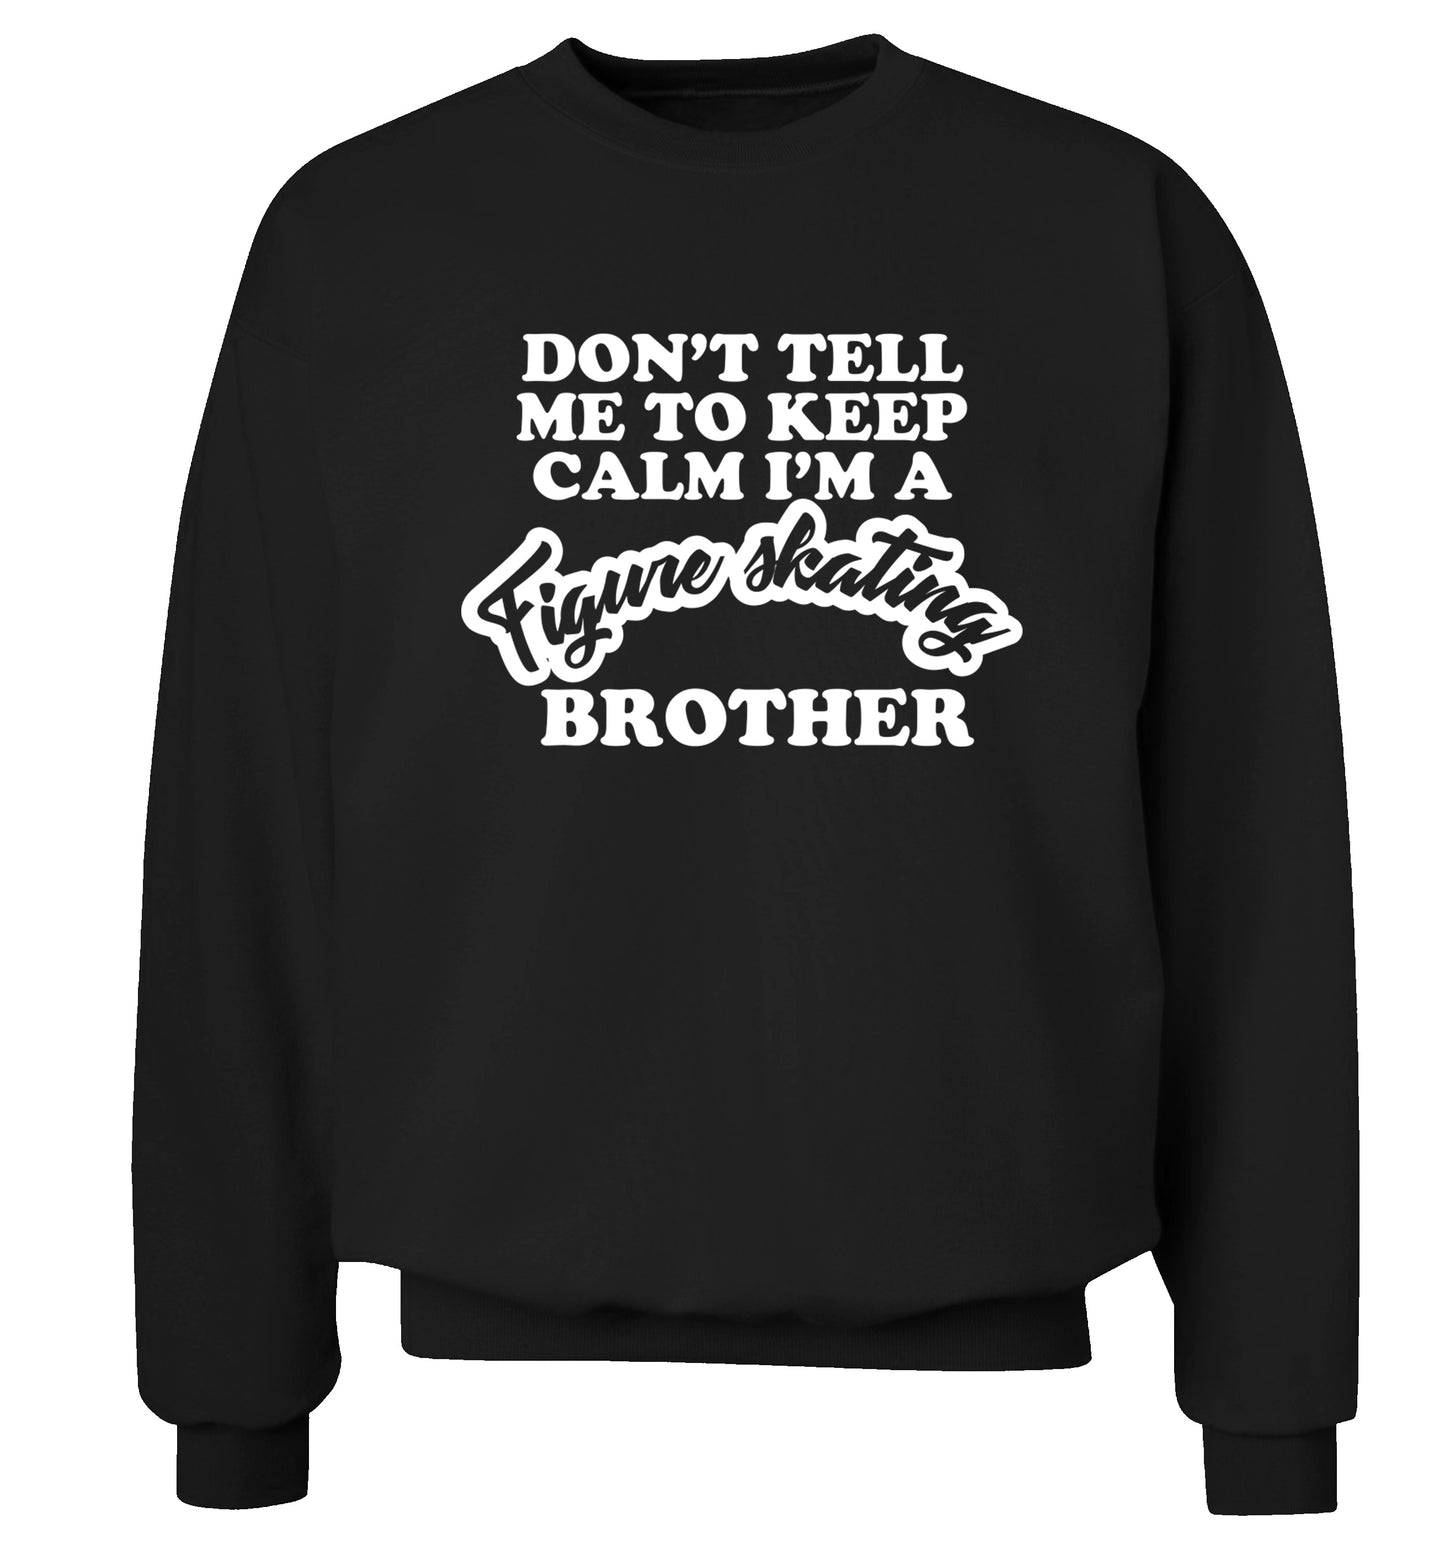 Don't tell me to keep calm I'm a figure skating brother Adult's unisexblack Sweater 2XL